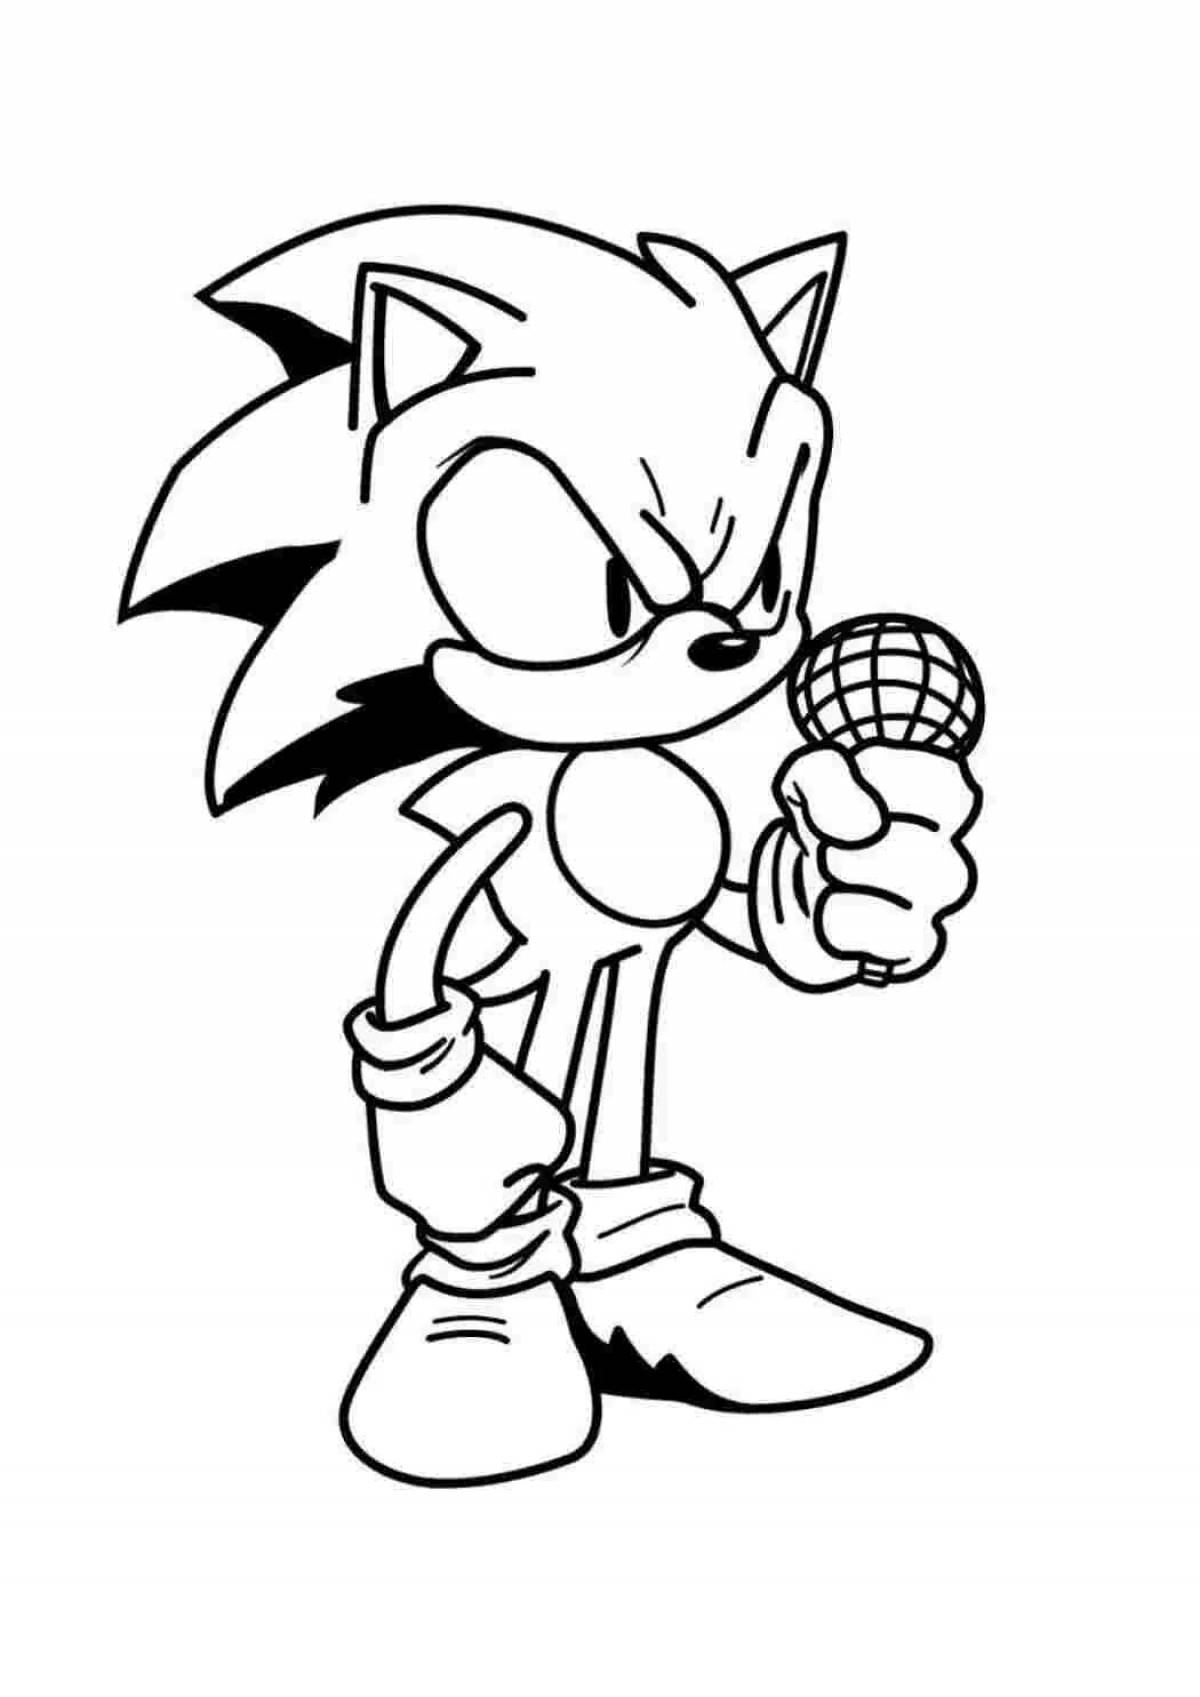 Rich sonic iron coloring